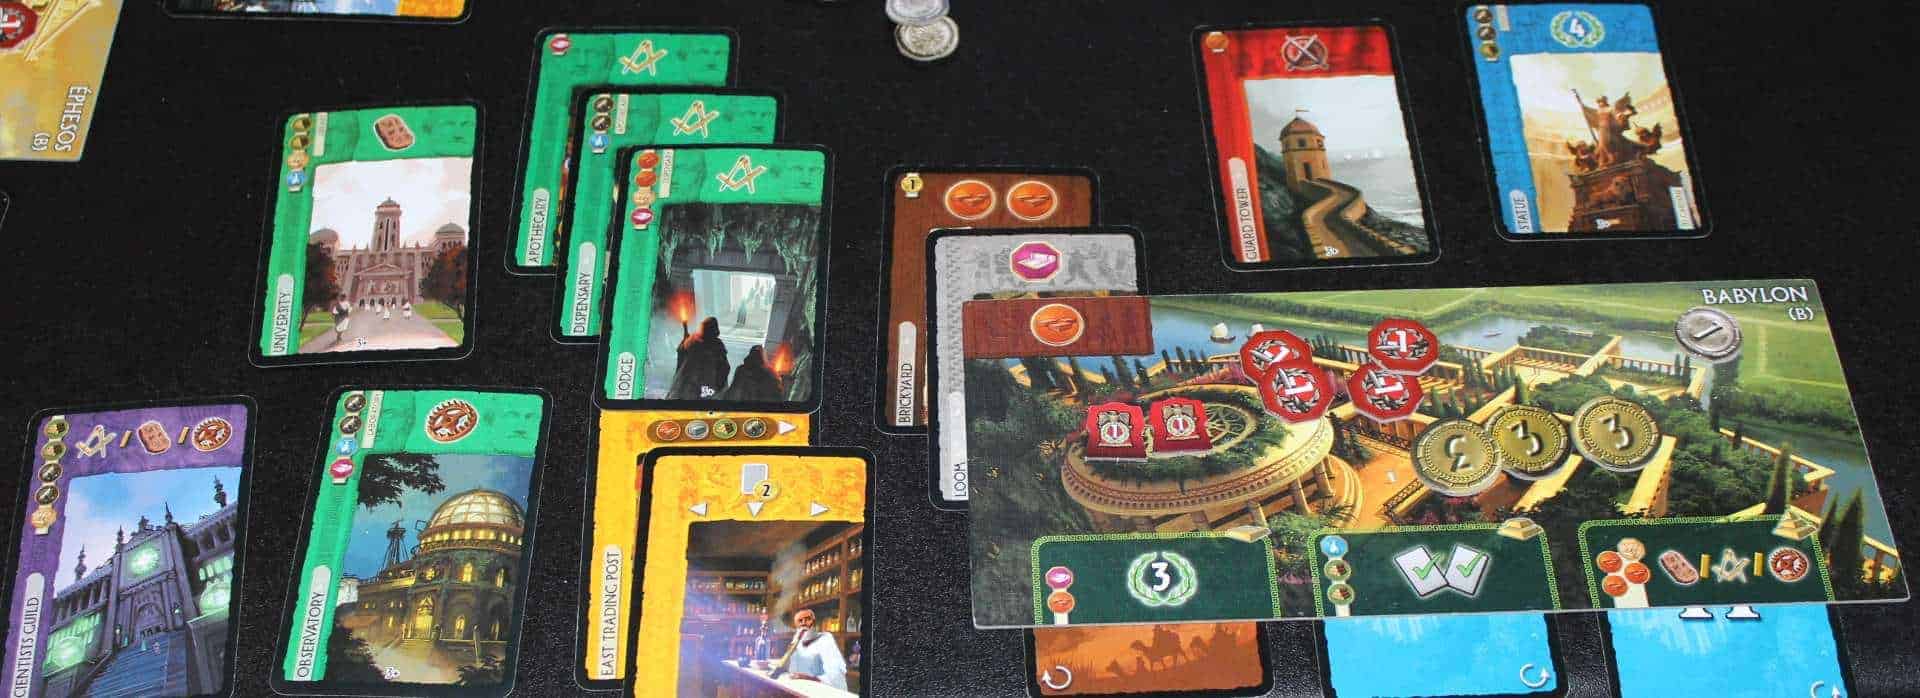 Time proven and tested - 7 Wonders is an epic board game that is considered by many one of the best family games of all time!